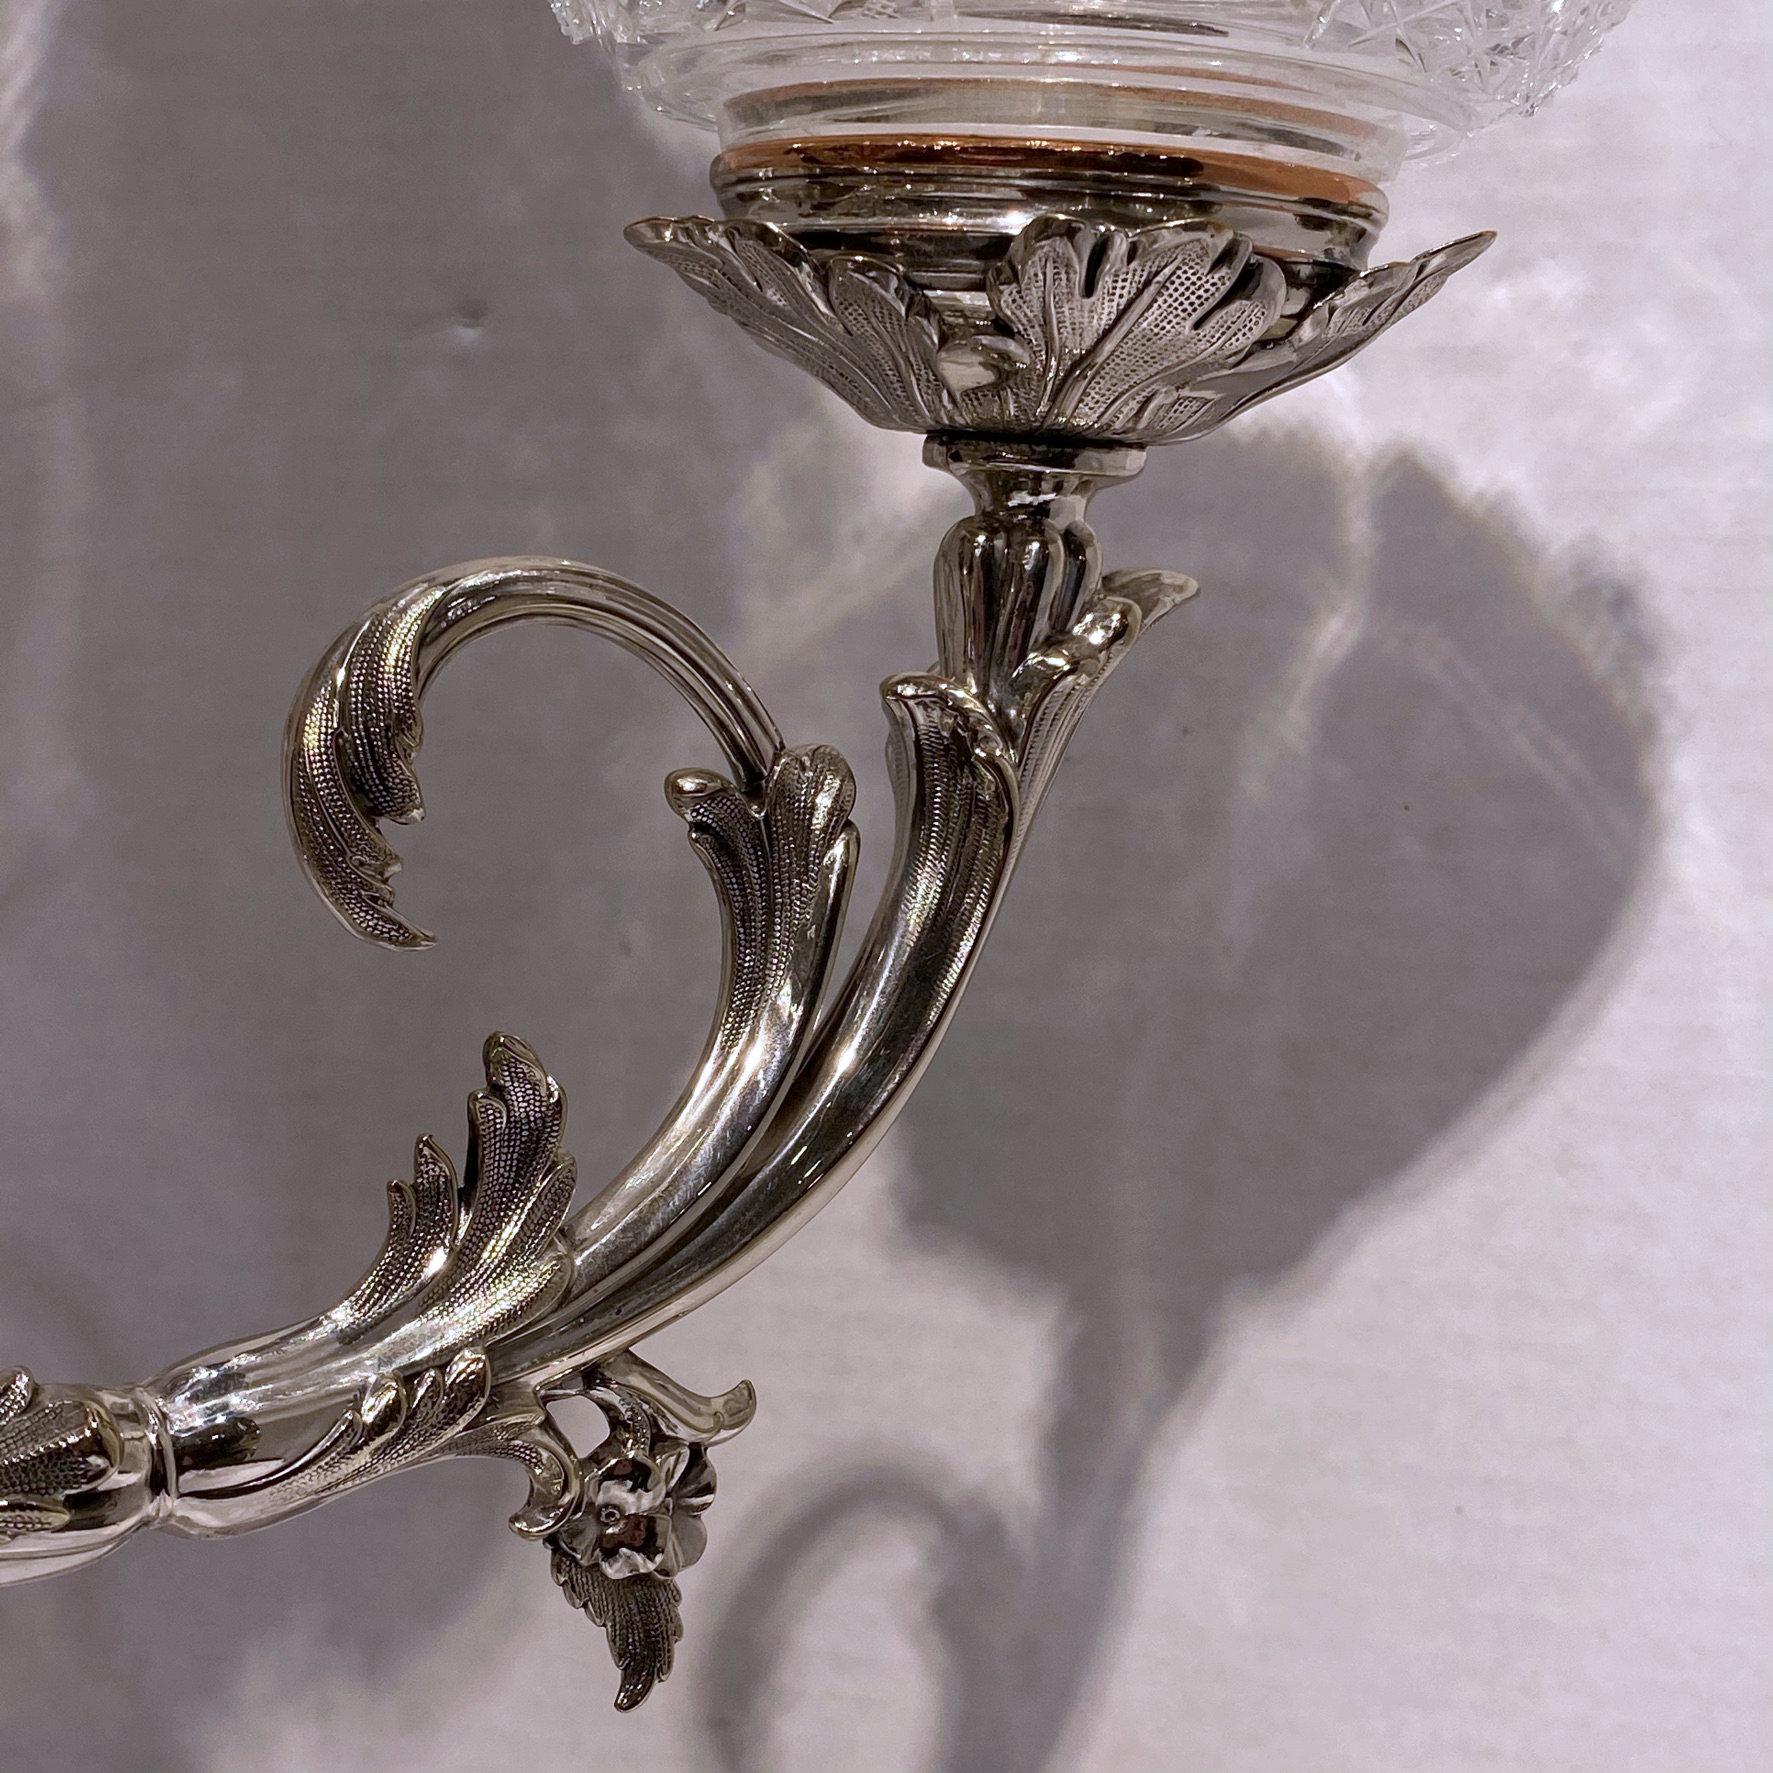 Silvered English 19th Century Silver Plated and Cut-Glass Epergne